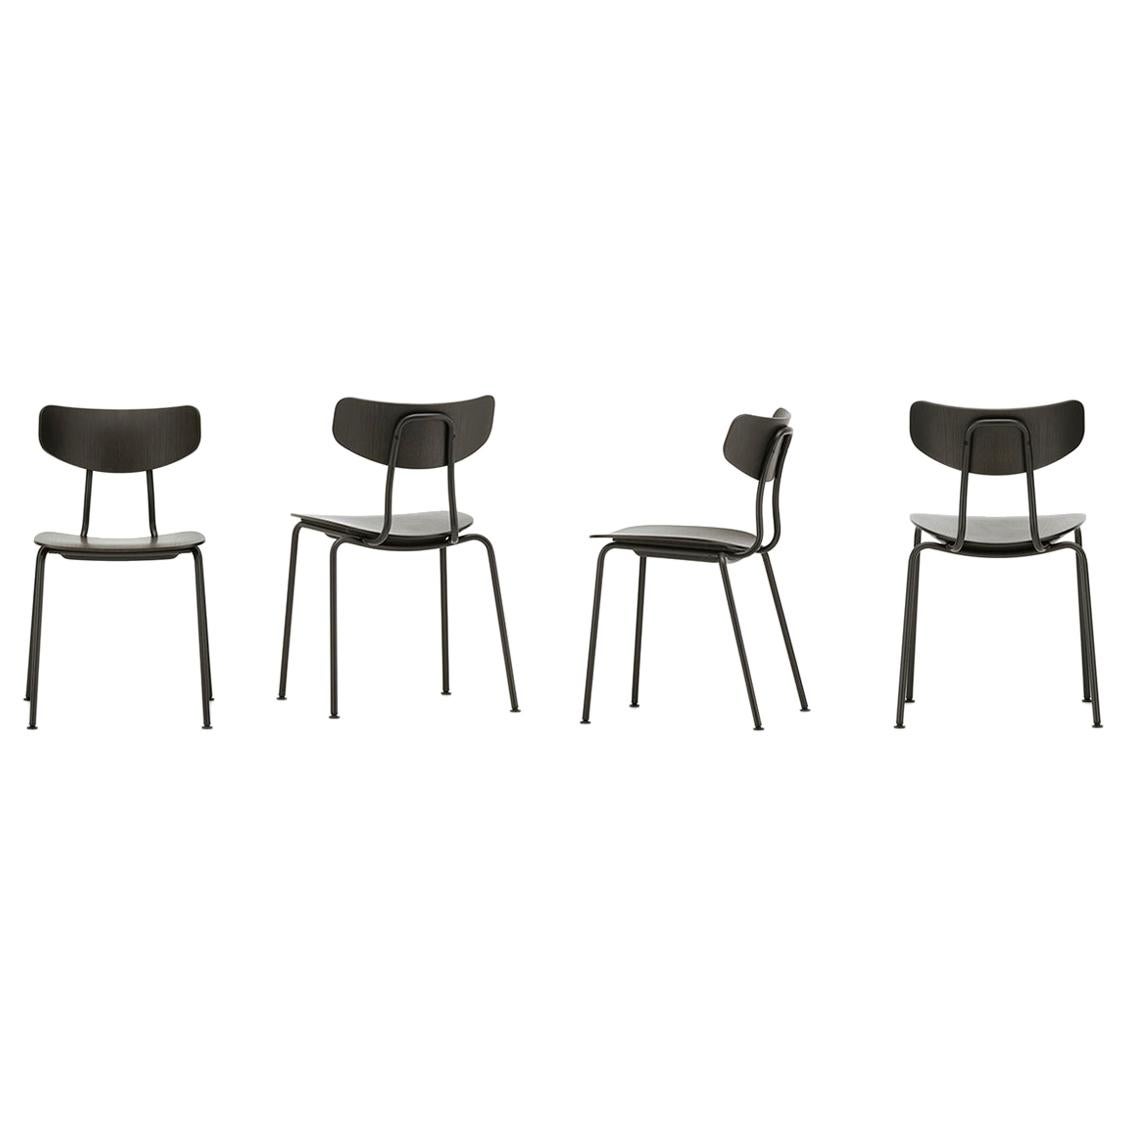 Set of Four Moca Chairs in Plywood and Metal Designed by Jasper Morrison